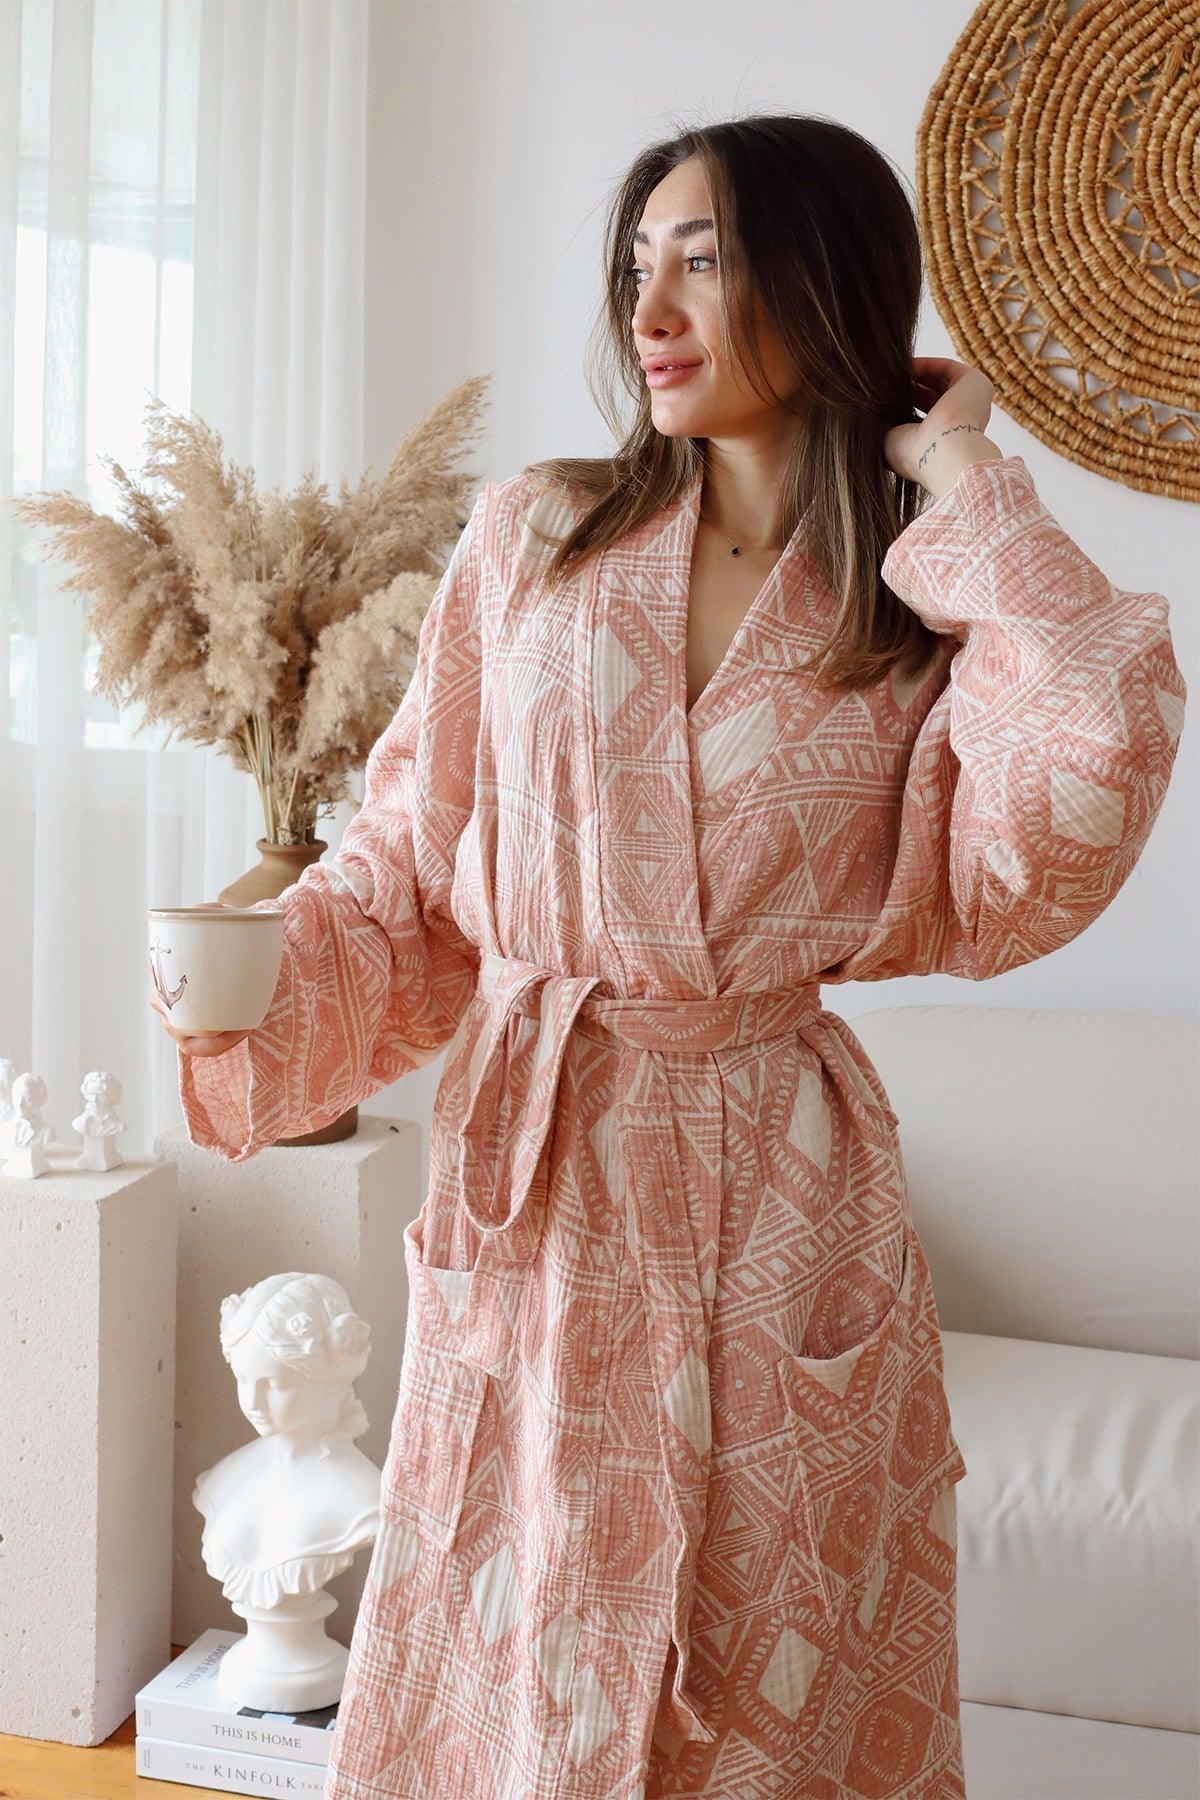 Adult Patterned Muslin Bathrobe, Special Design 100% Cotton 3 Ply Double Sided - Swordslife